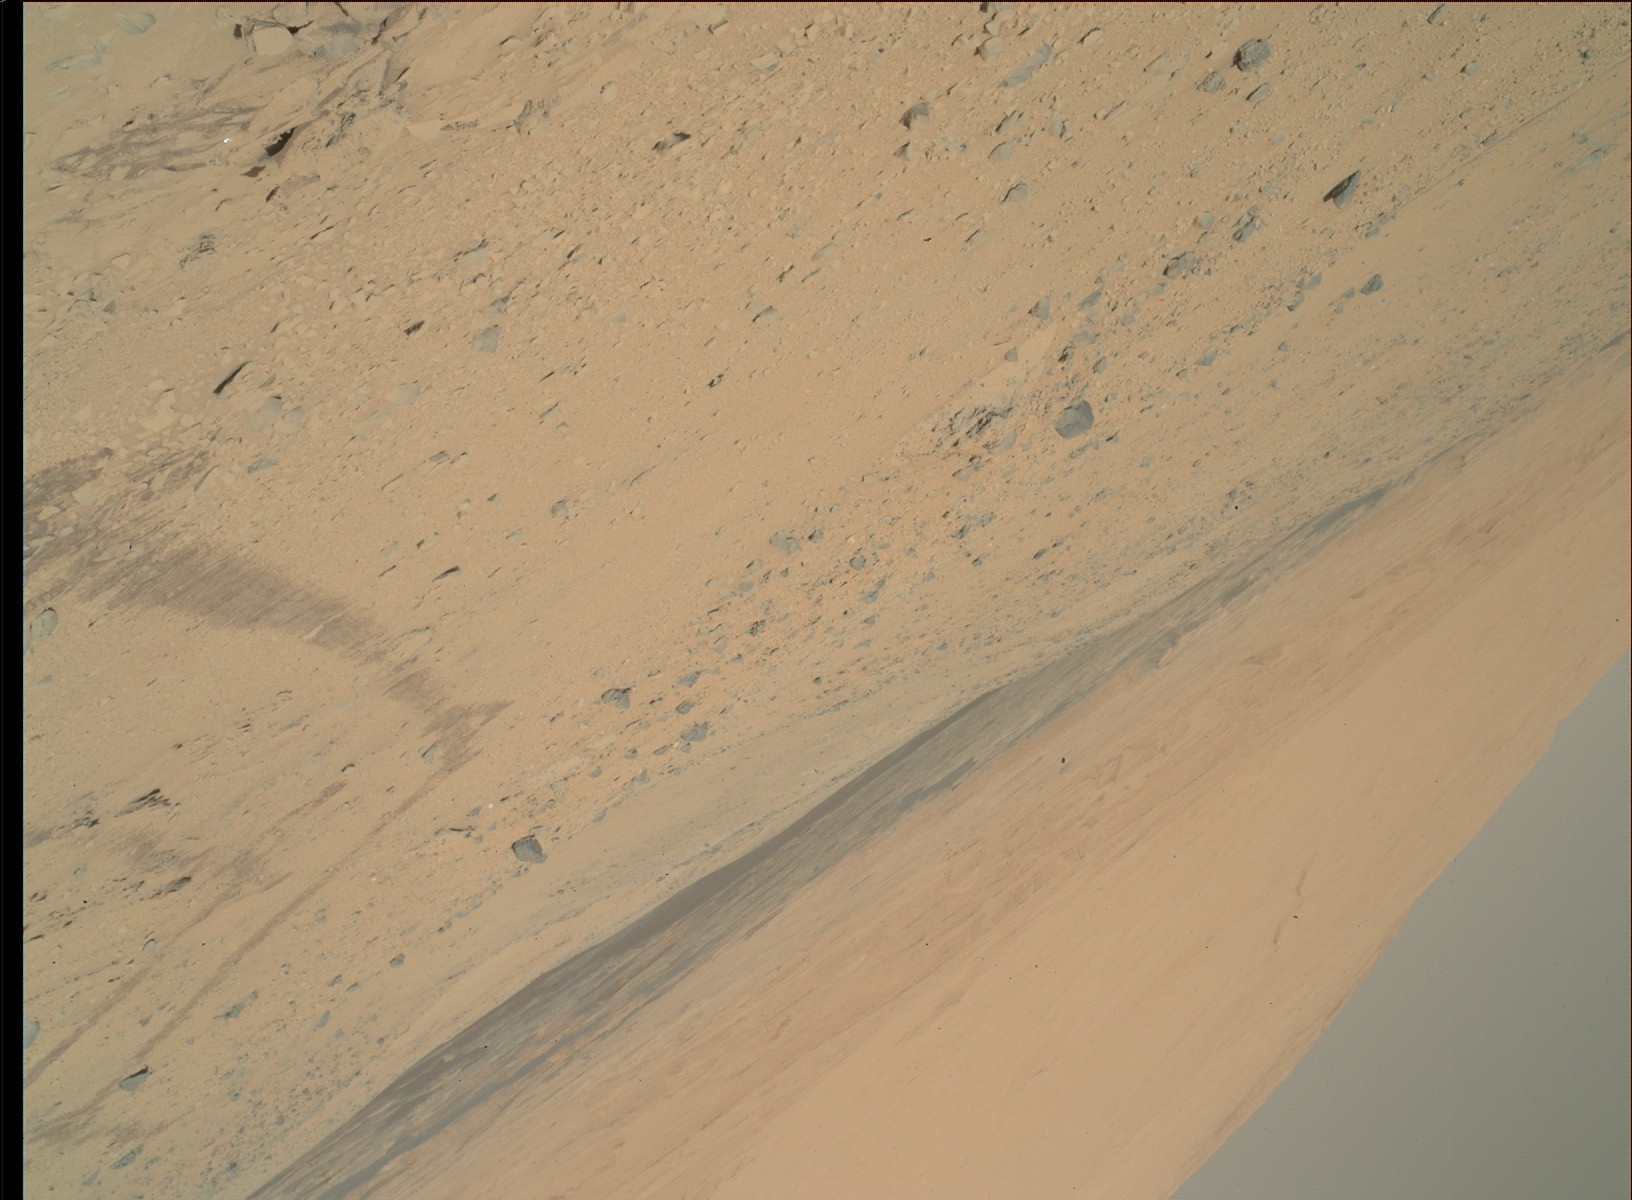 Nasa's Mars rover Curiosity acquired this image using its Mars Hand Lens Imager (MAHLI) on Sol 528, at drive 184, site number 26